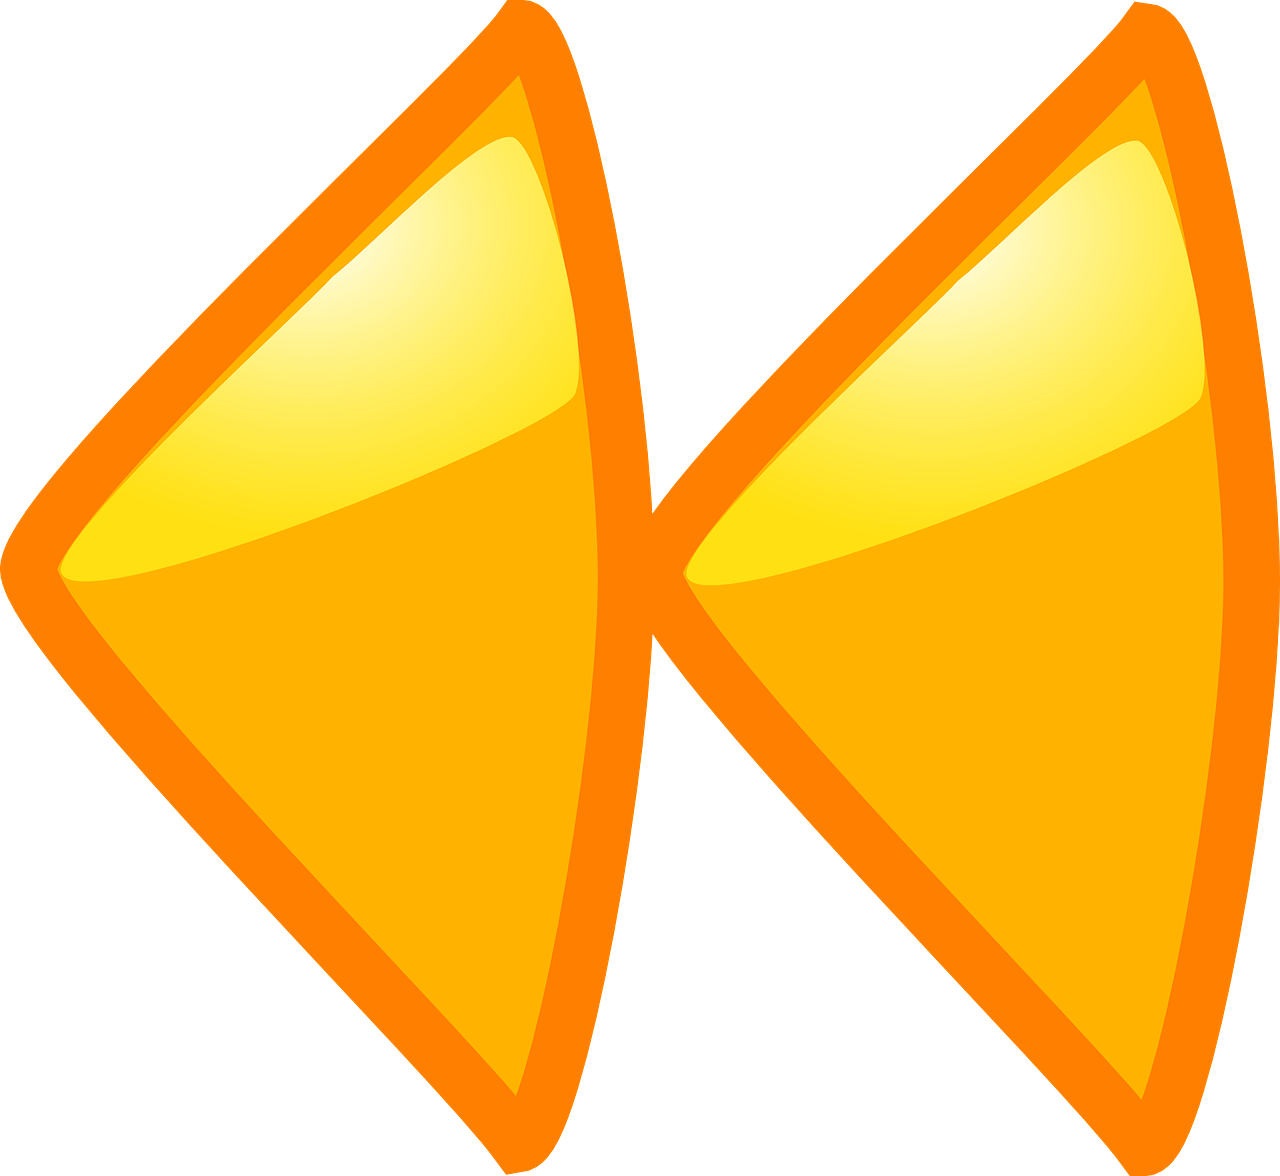 A Yellow Triangle Shaped Objects